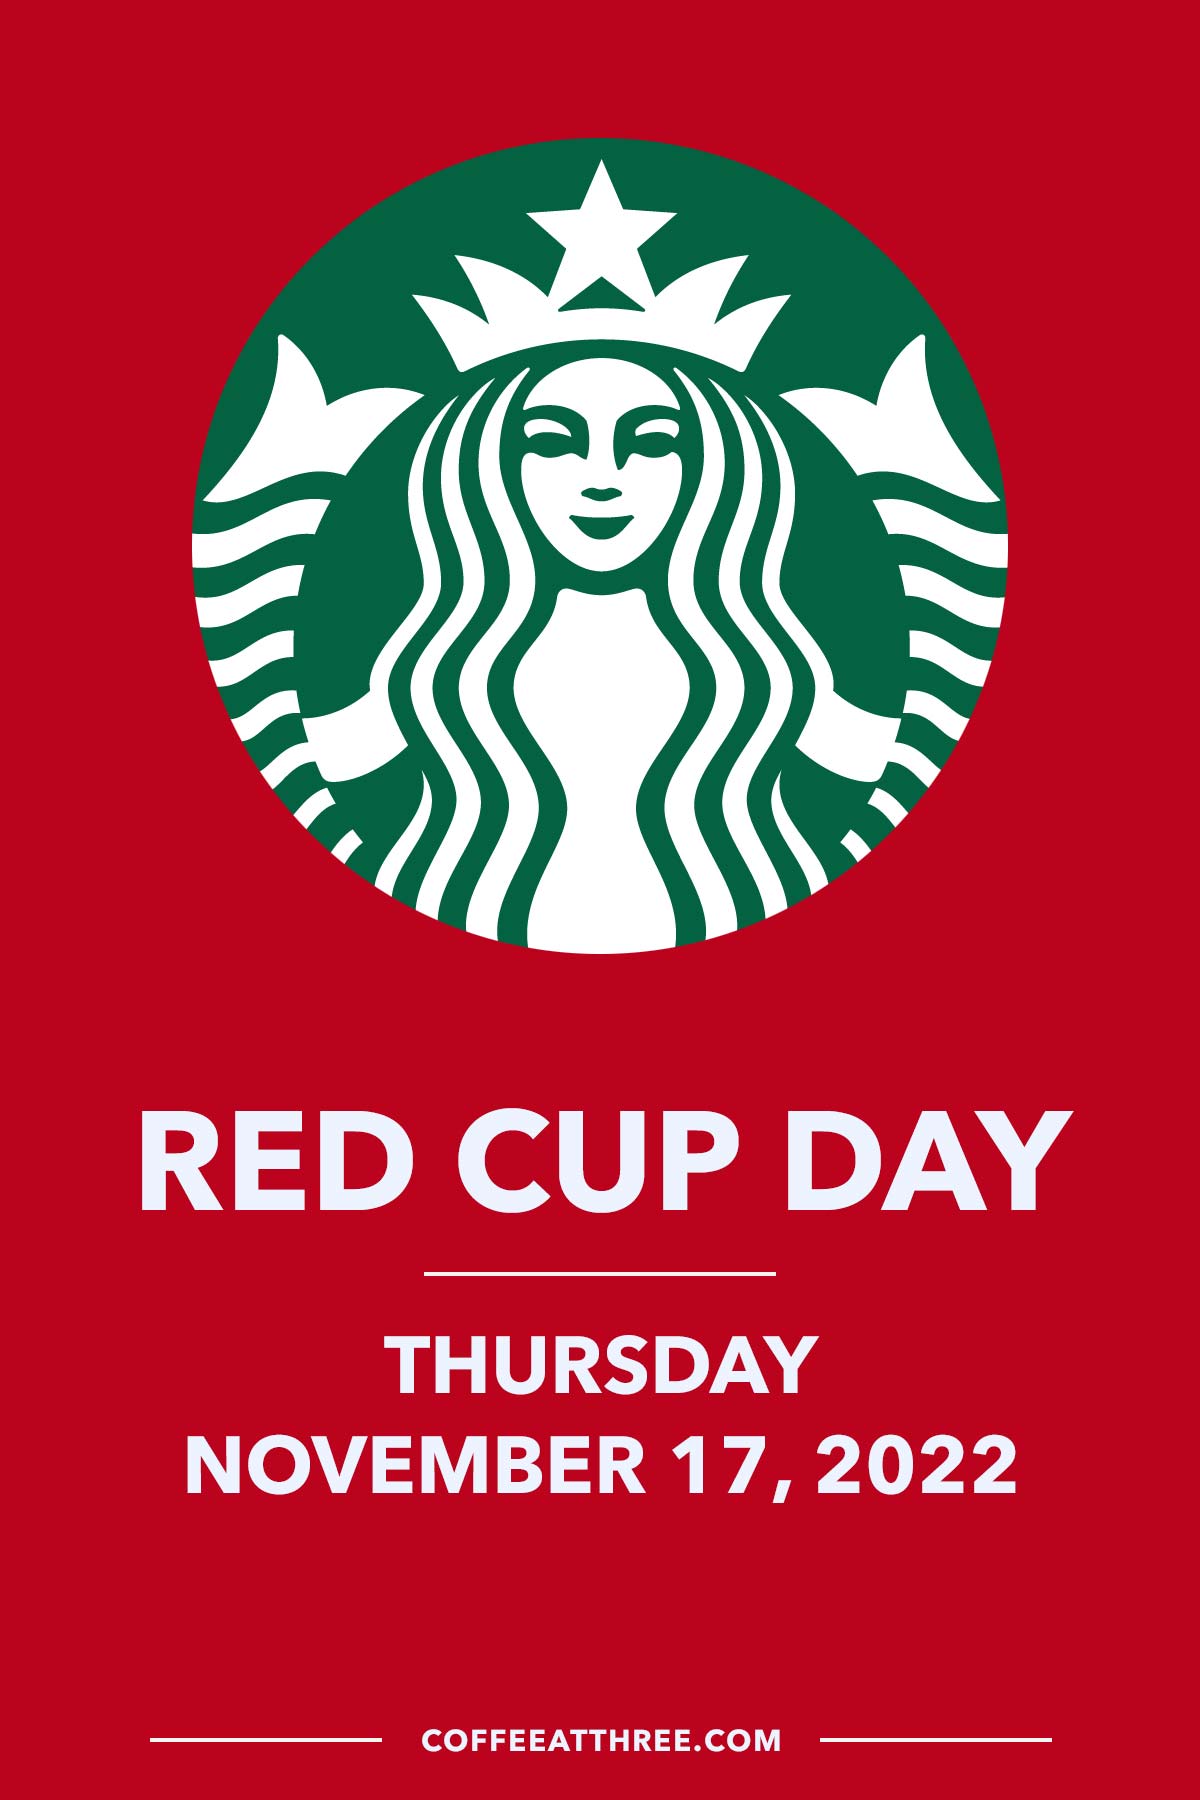 Starbucks logo with text "Red Cup Day Thursday, November 17th, 2022" written on red background.